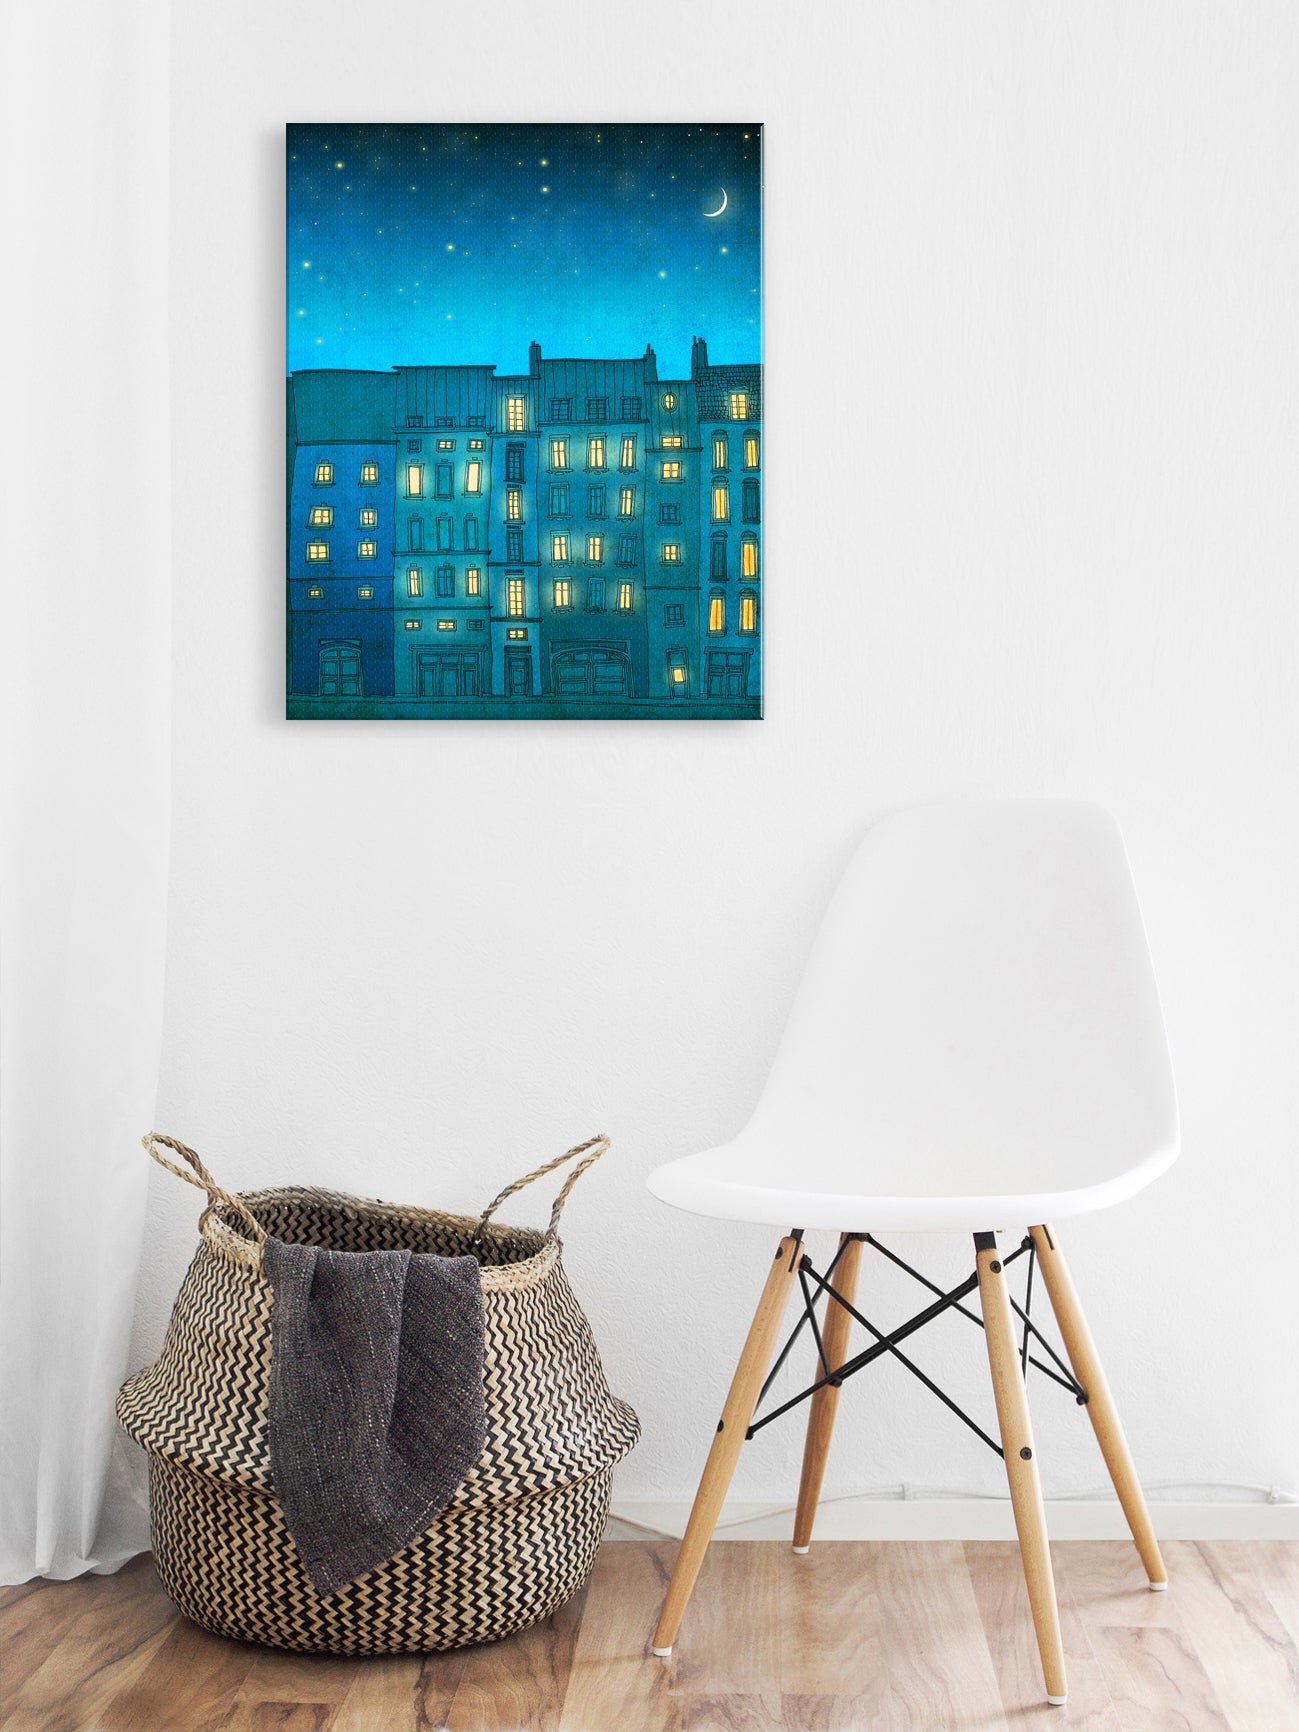 You are not alone - Canvas Art Print